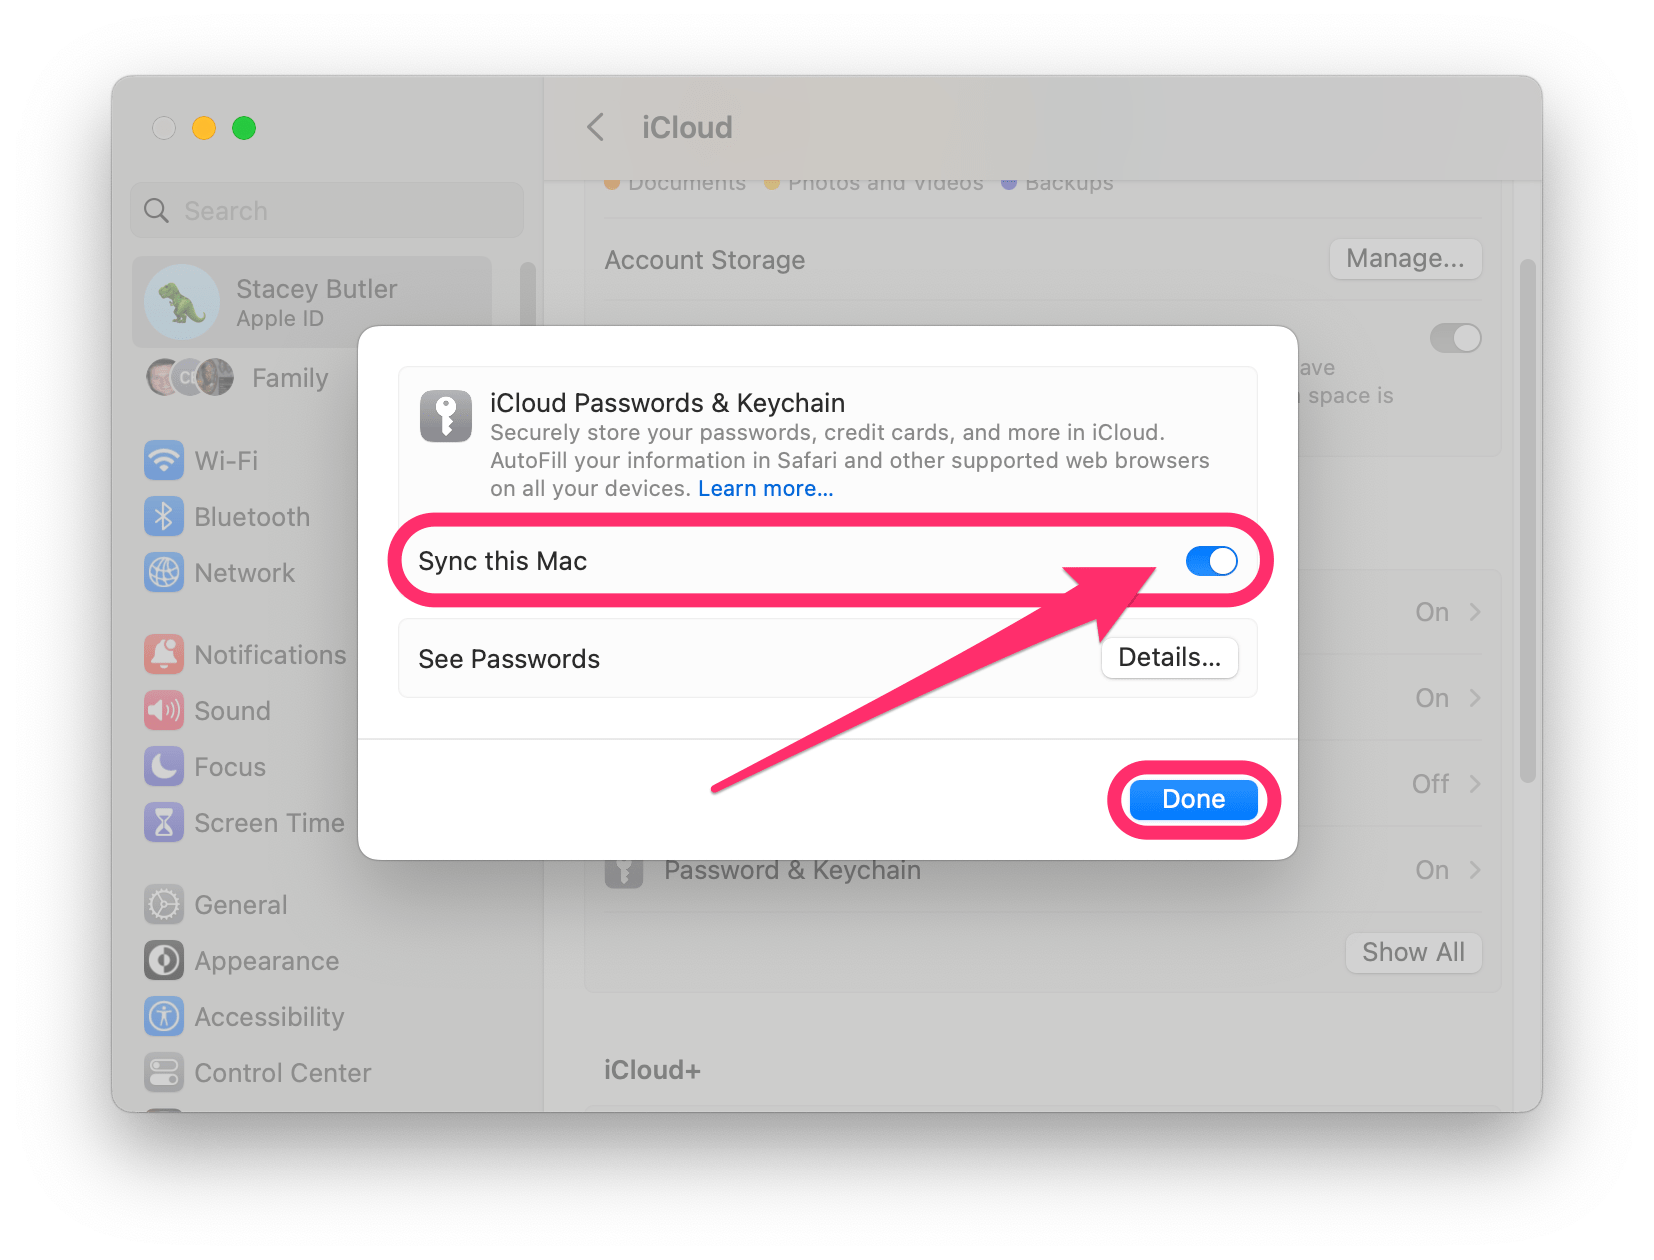 iCloud passwords & keychain on Mac in system settings